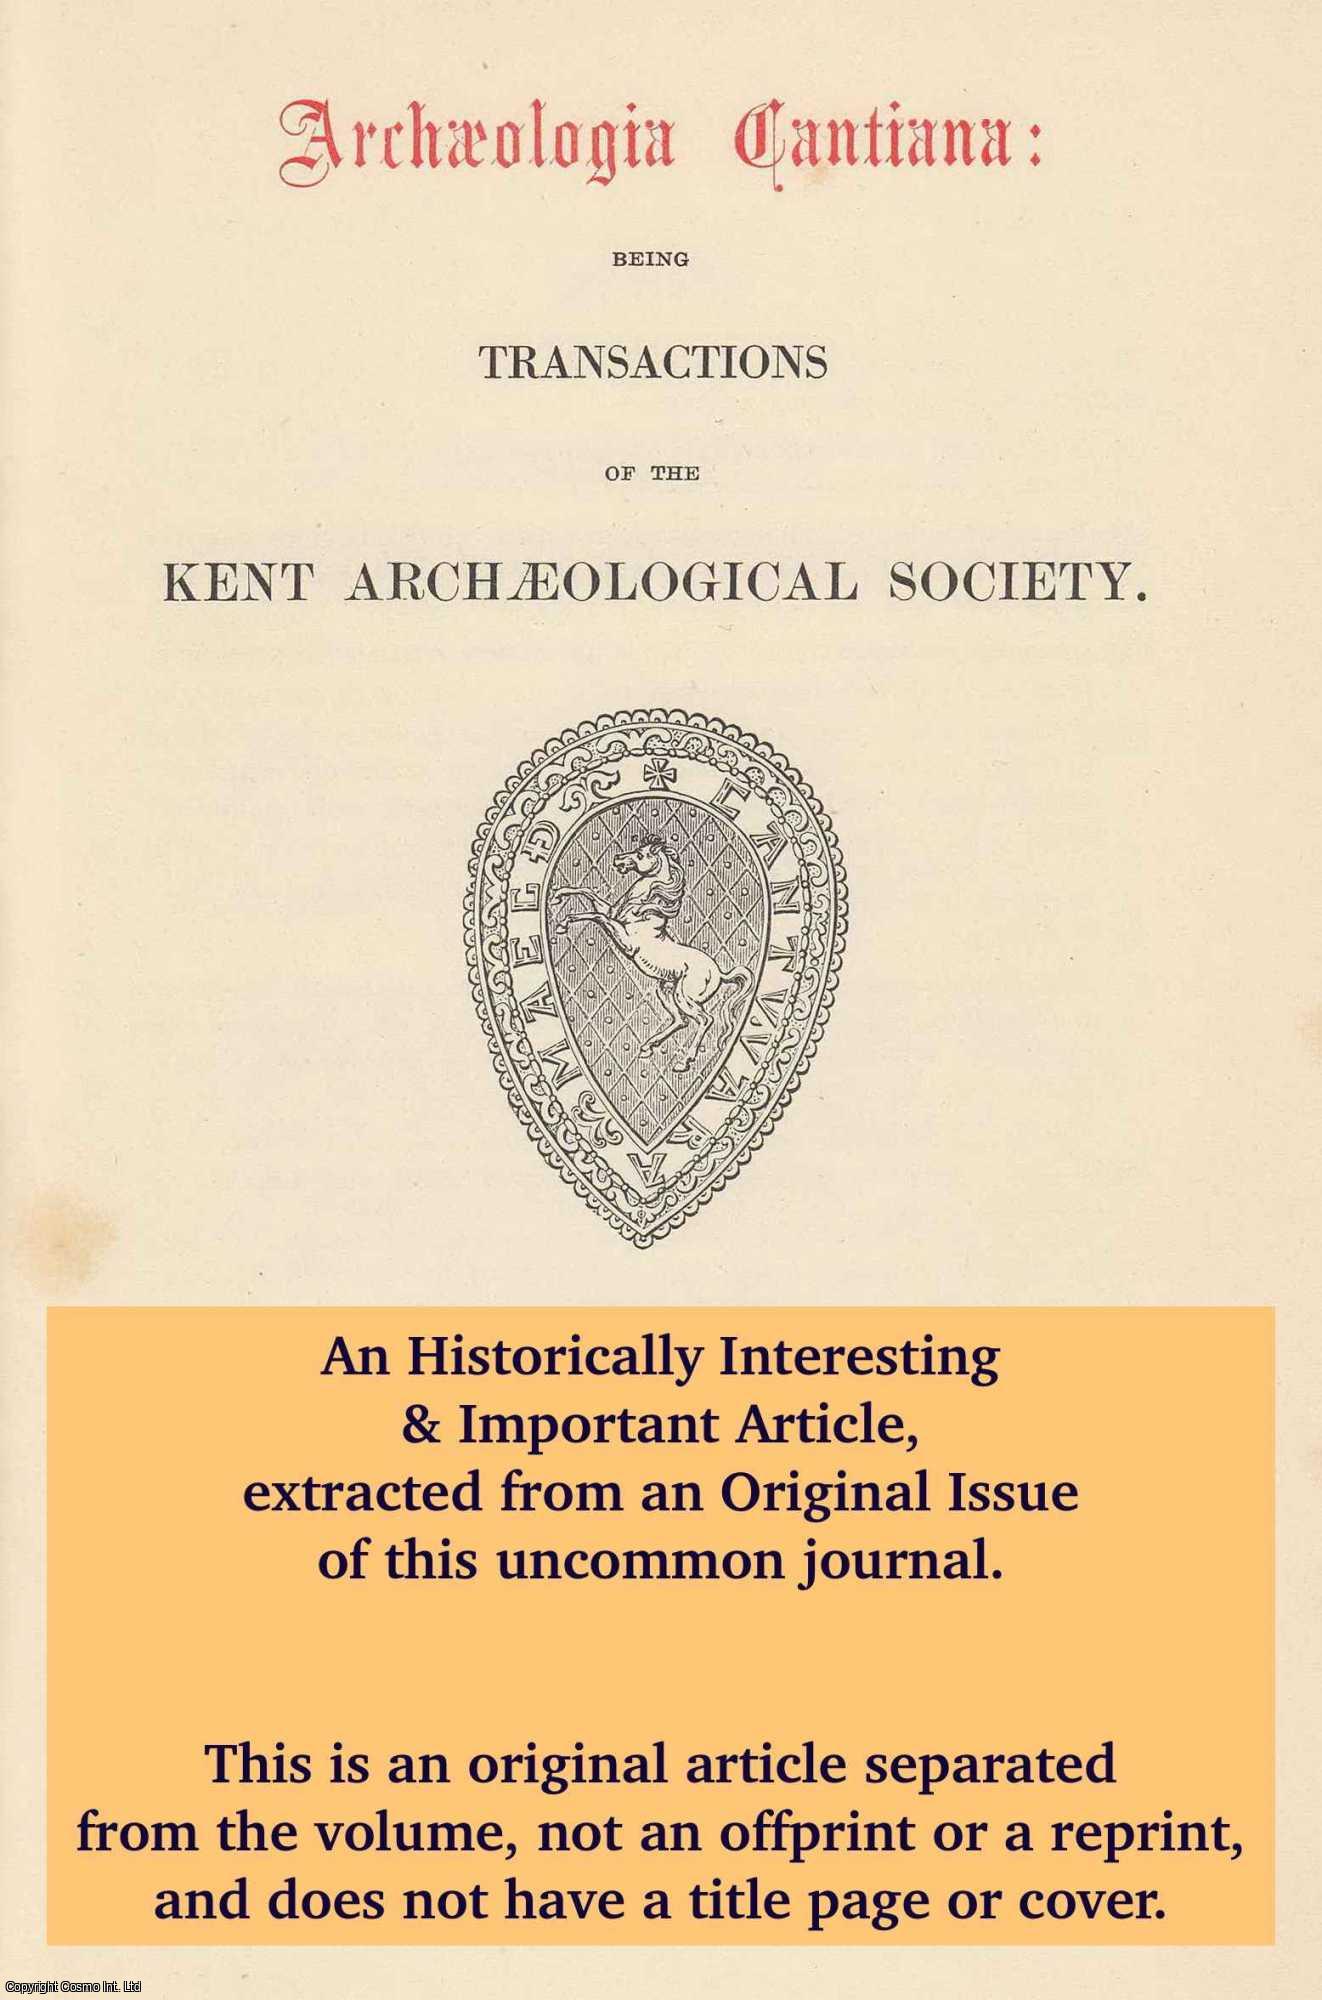 J.A. Pyke - Danes Trench and Prehistoric Land Division in the Upper Darent Valley. An original article from The Archaeologia Cantiana: Transactions of The Kent Archaeological Society, 1979.